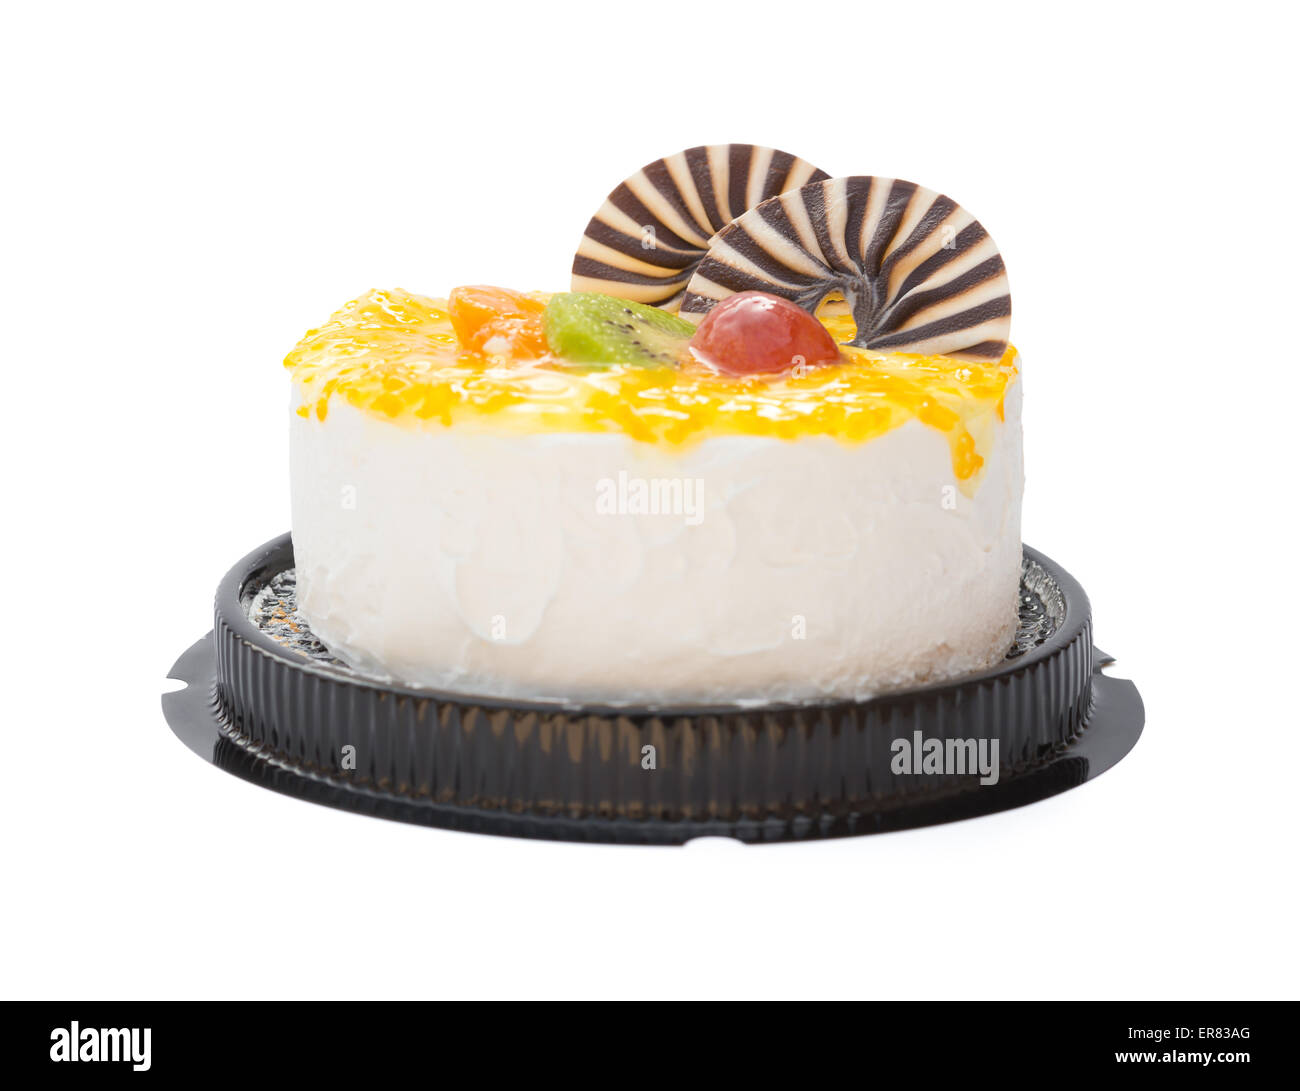 yummy cake on white with grape orange kiwifruit and chocolate on top, clipping path included Stock Photo